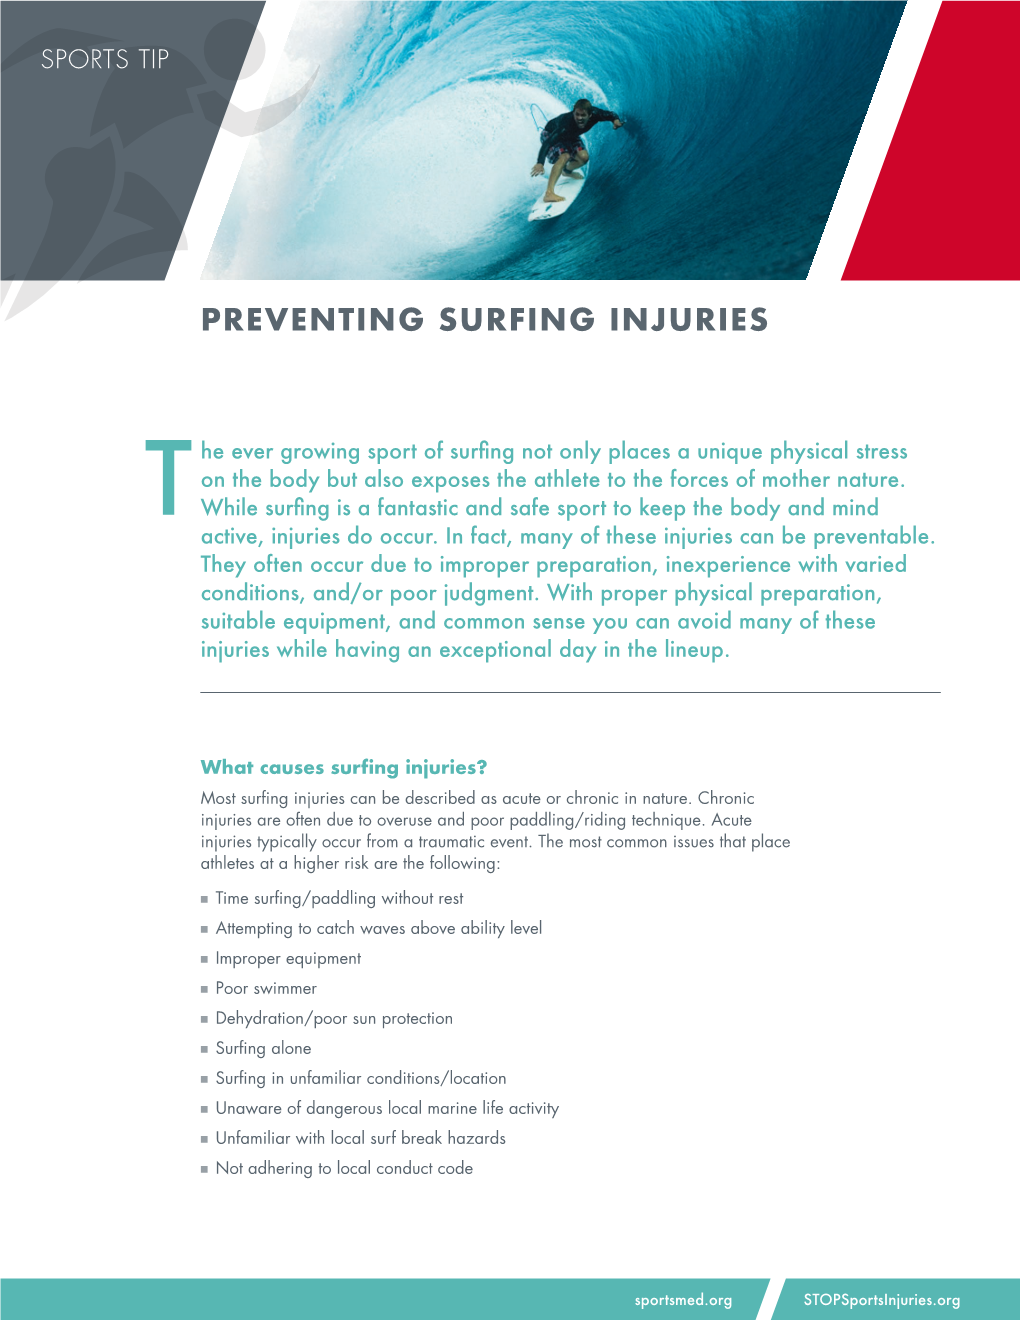 Preventing Surfing Injuries